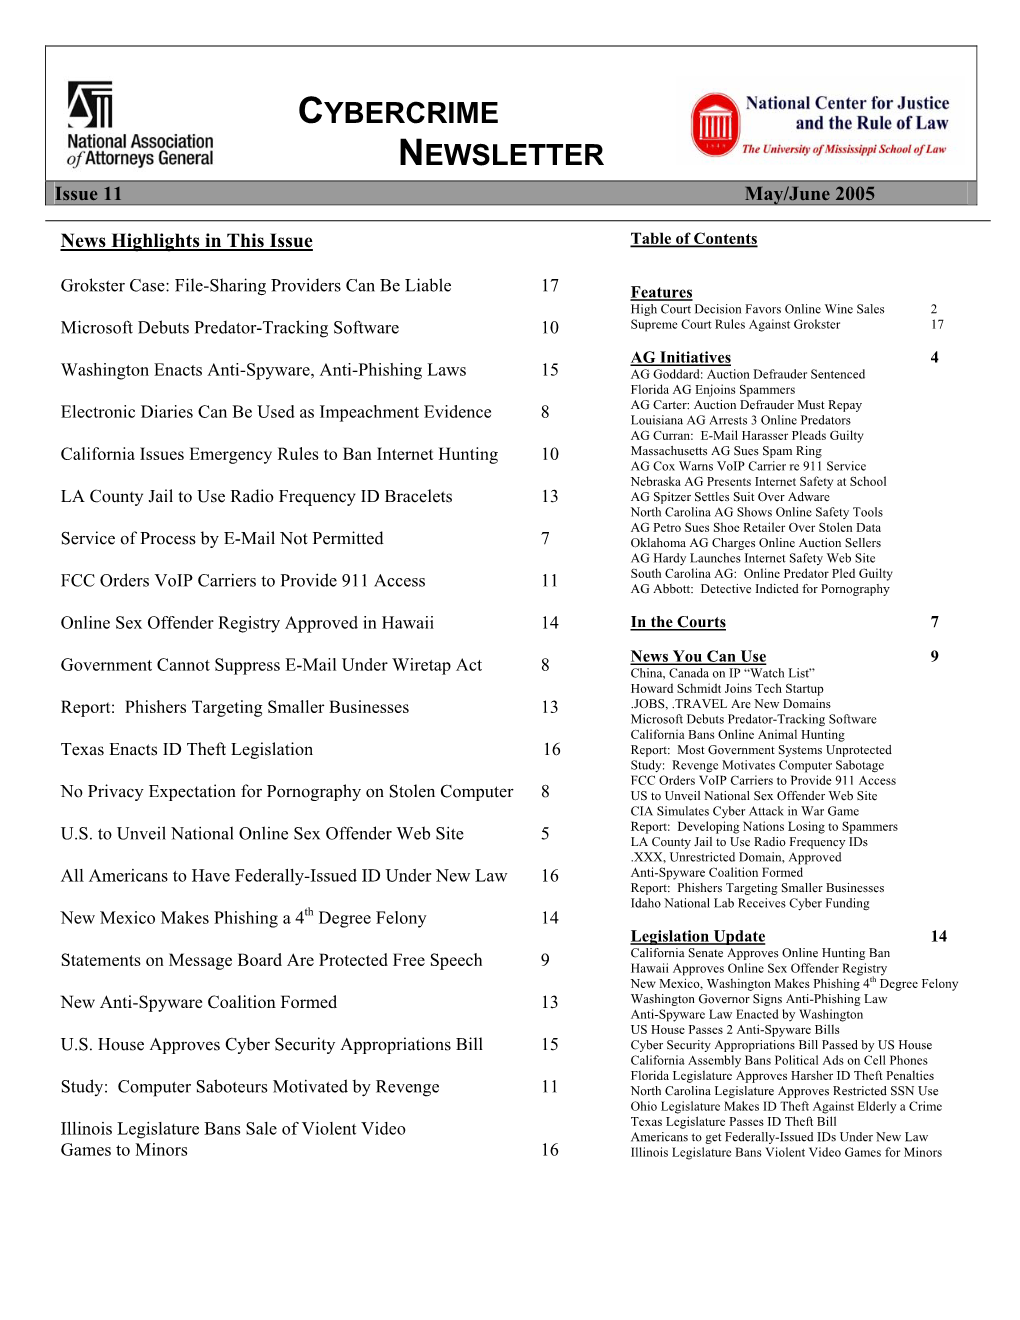 CYBERCRIME NEWSLETTER Issue 11 May/June 2005